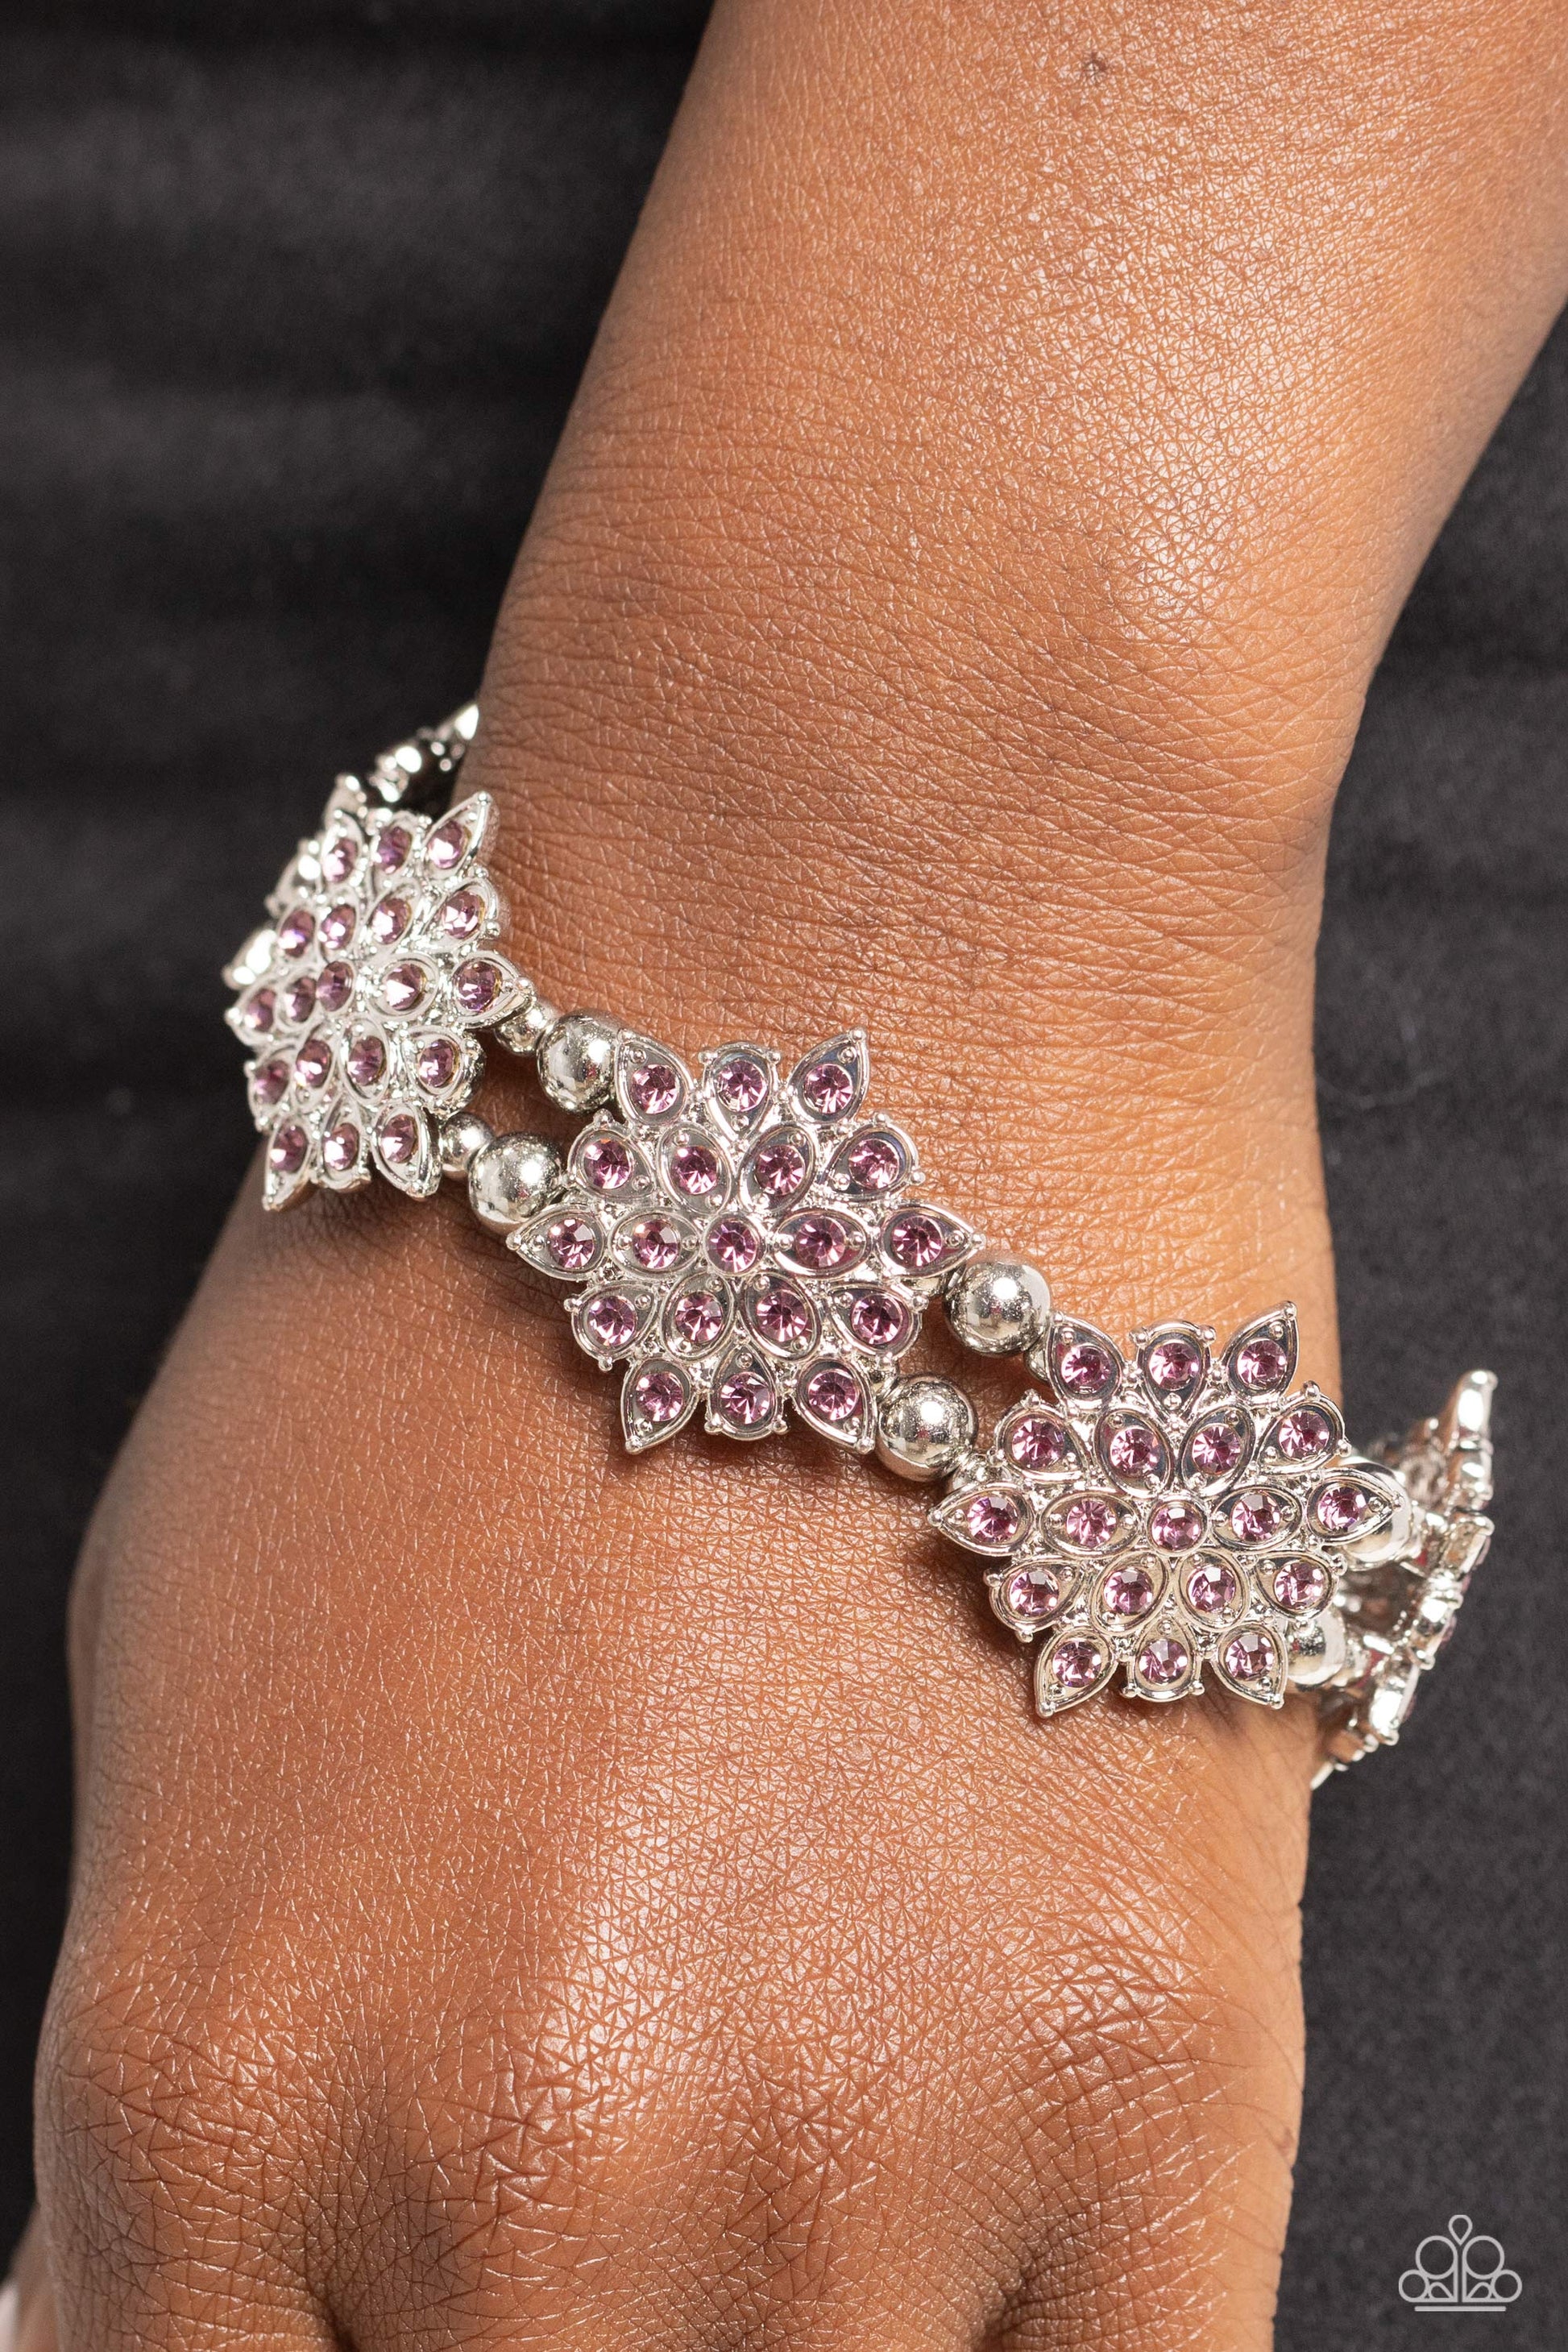 Delicate layers of silver teardrop frames dotted with glistening purple rhinestones combine to create a stunning snowflake-like shape. Infused along elastic stretchy bands around the wrist, the icy frames combine with silver beads in varying sizes for a monochromatic statement.